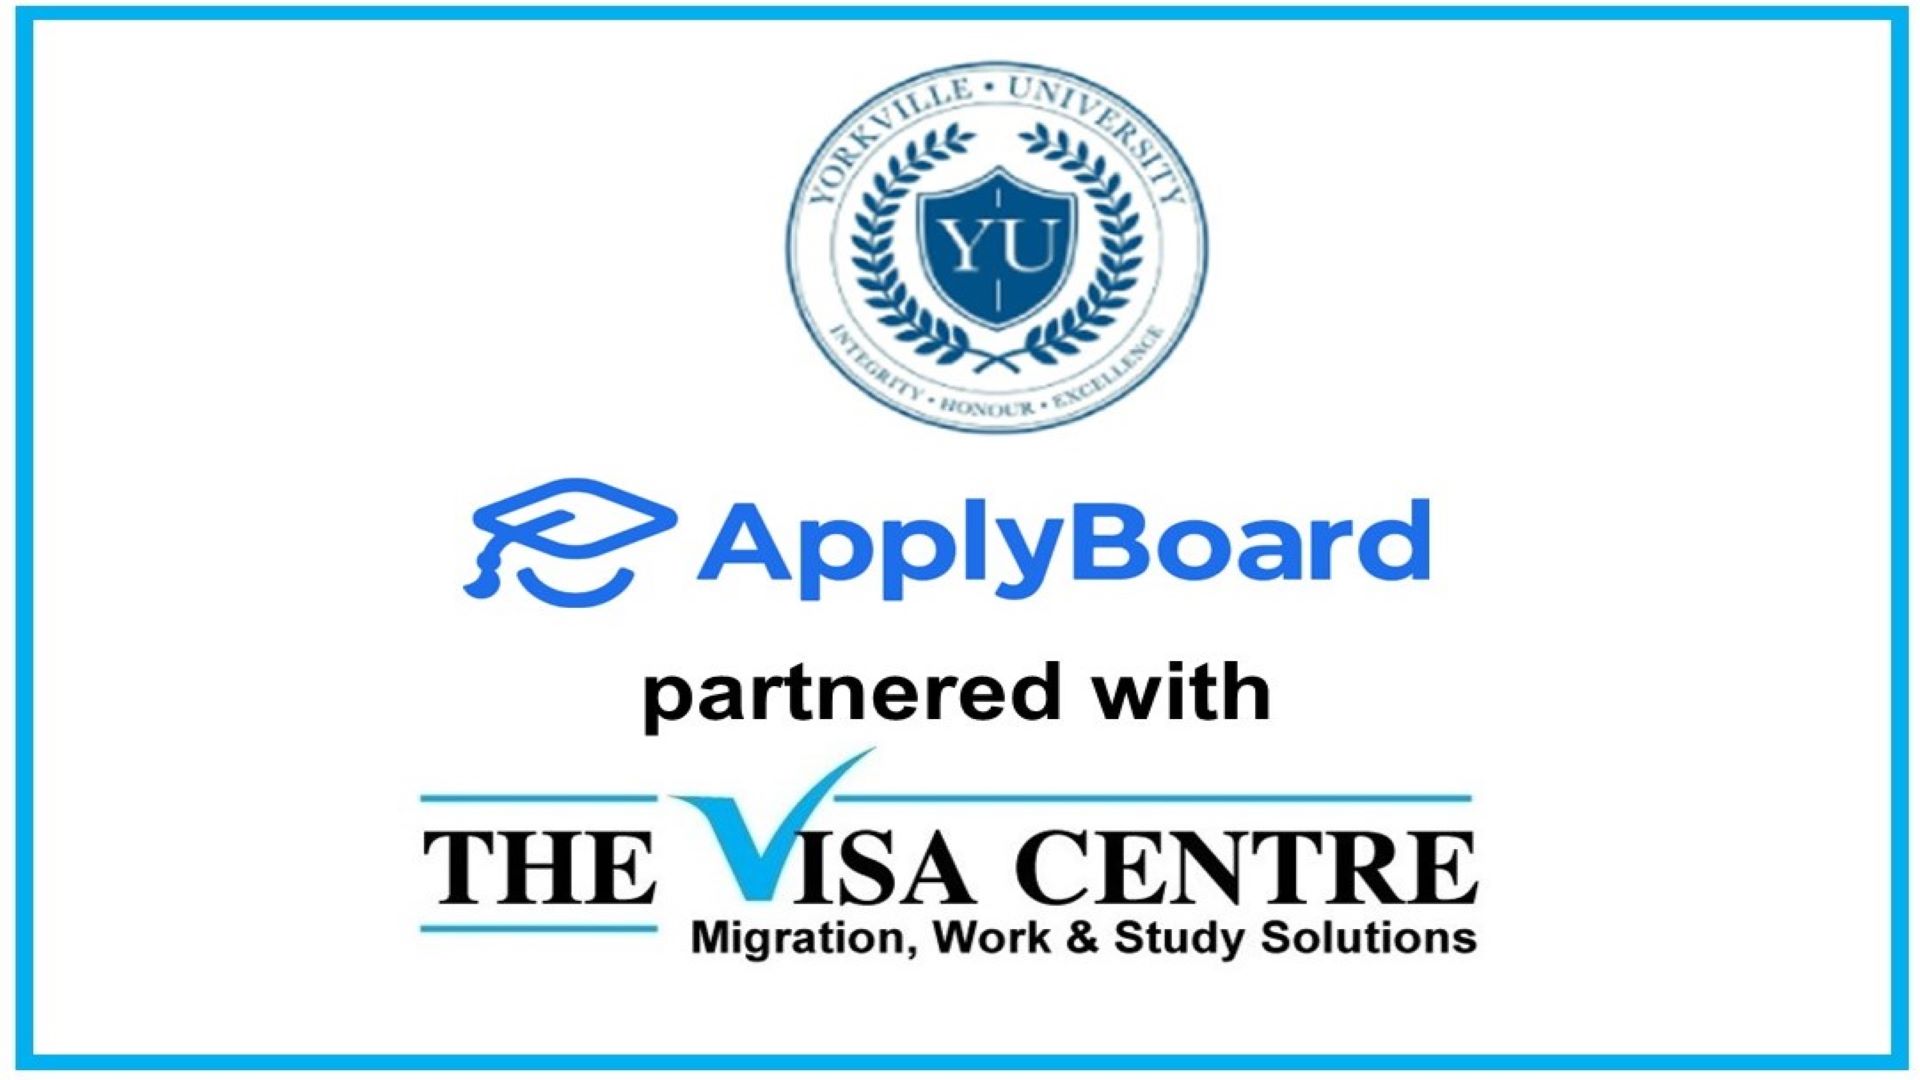 Yorkville University, Canada & ApplyBoard Interview Session on 23rd November 2022